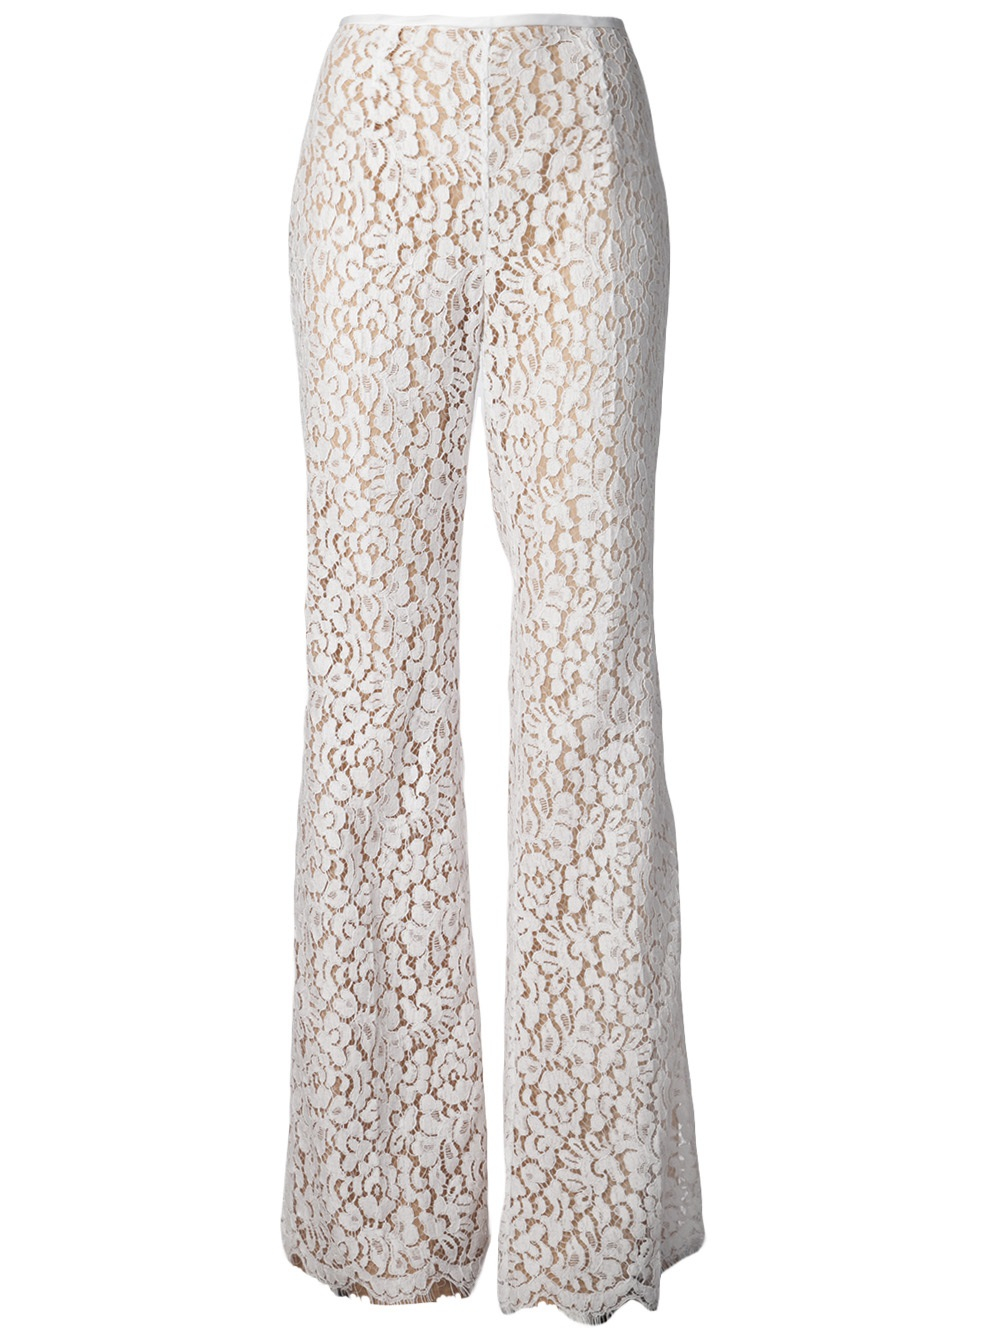 Michael Kors Floral Lace Trousers in White | Lyst